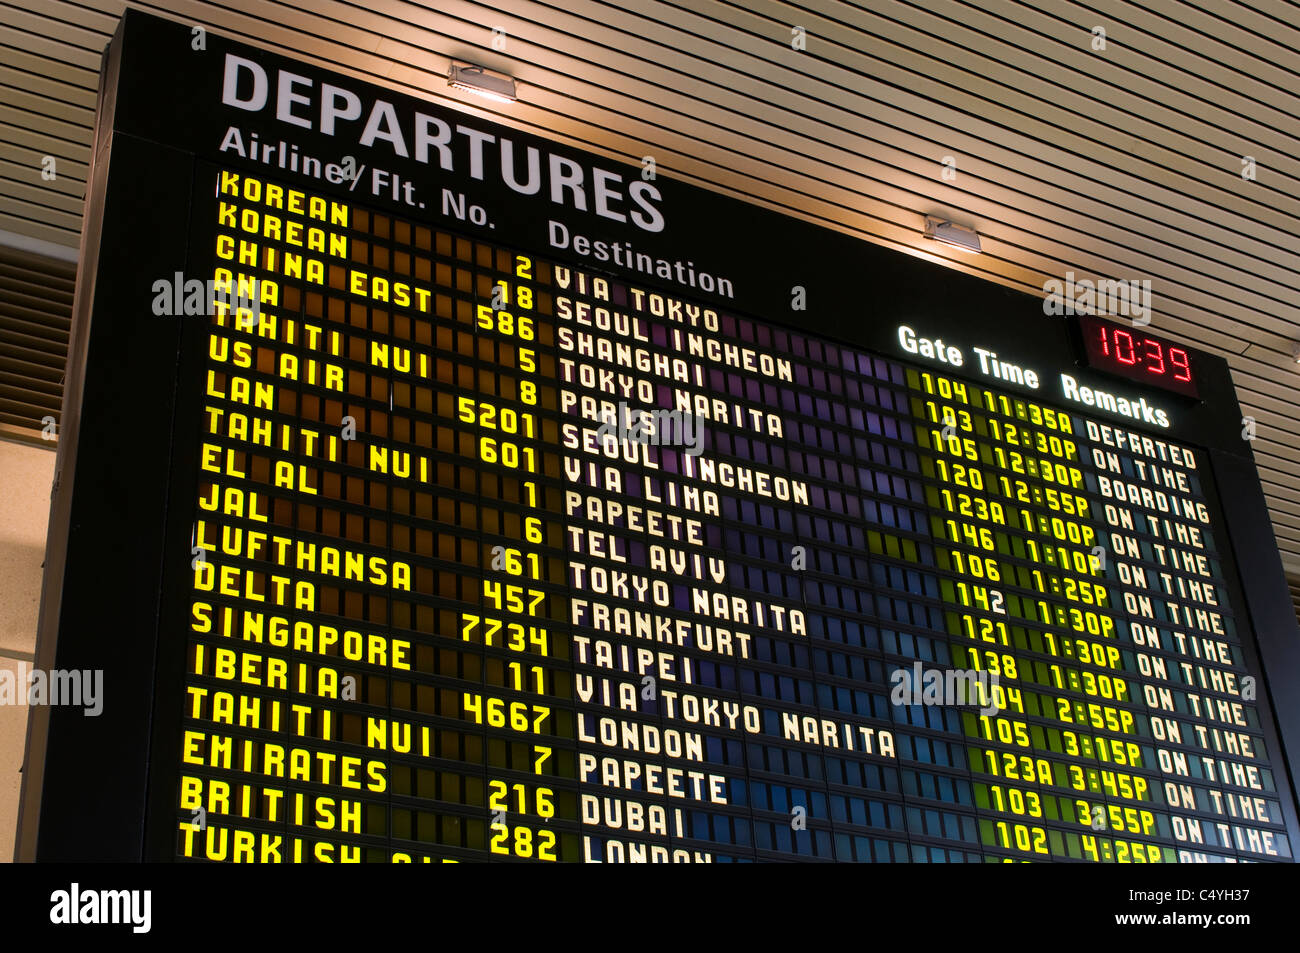 flight schedule monitor at airport Stock Photo Alamy